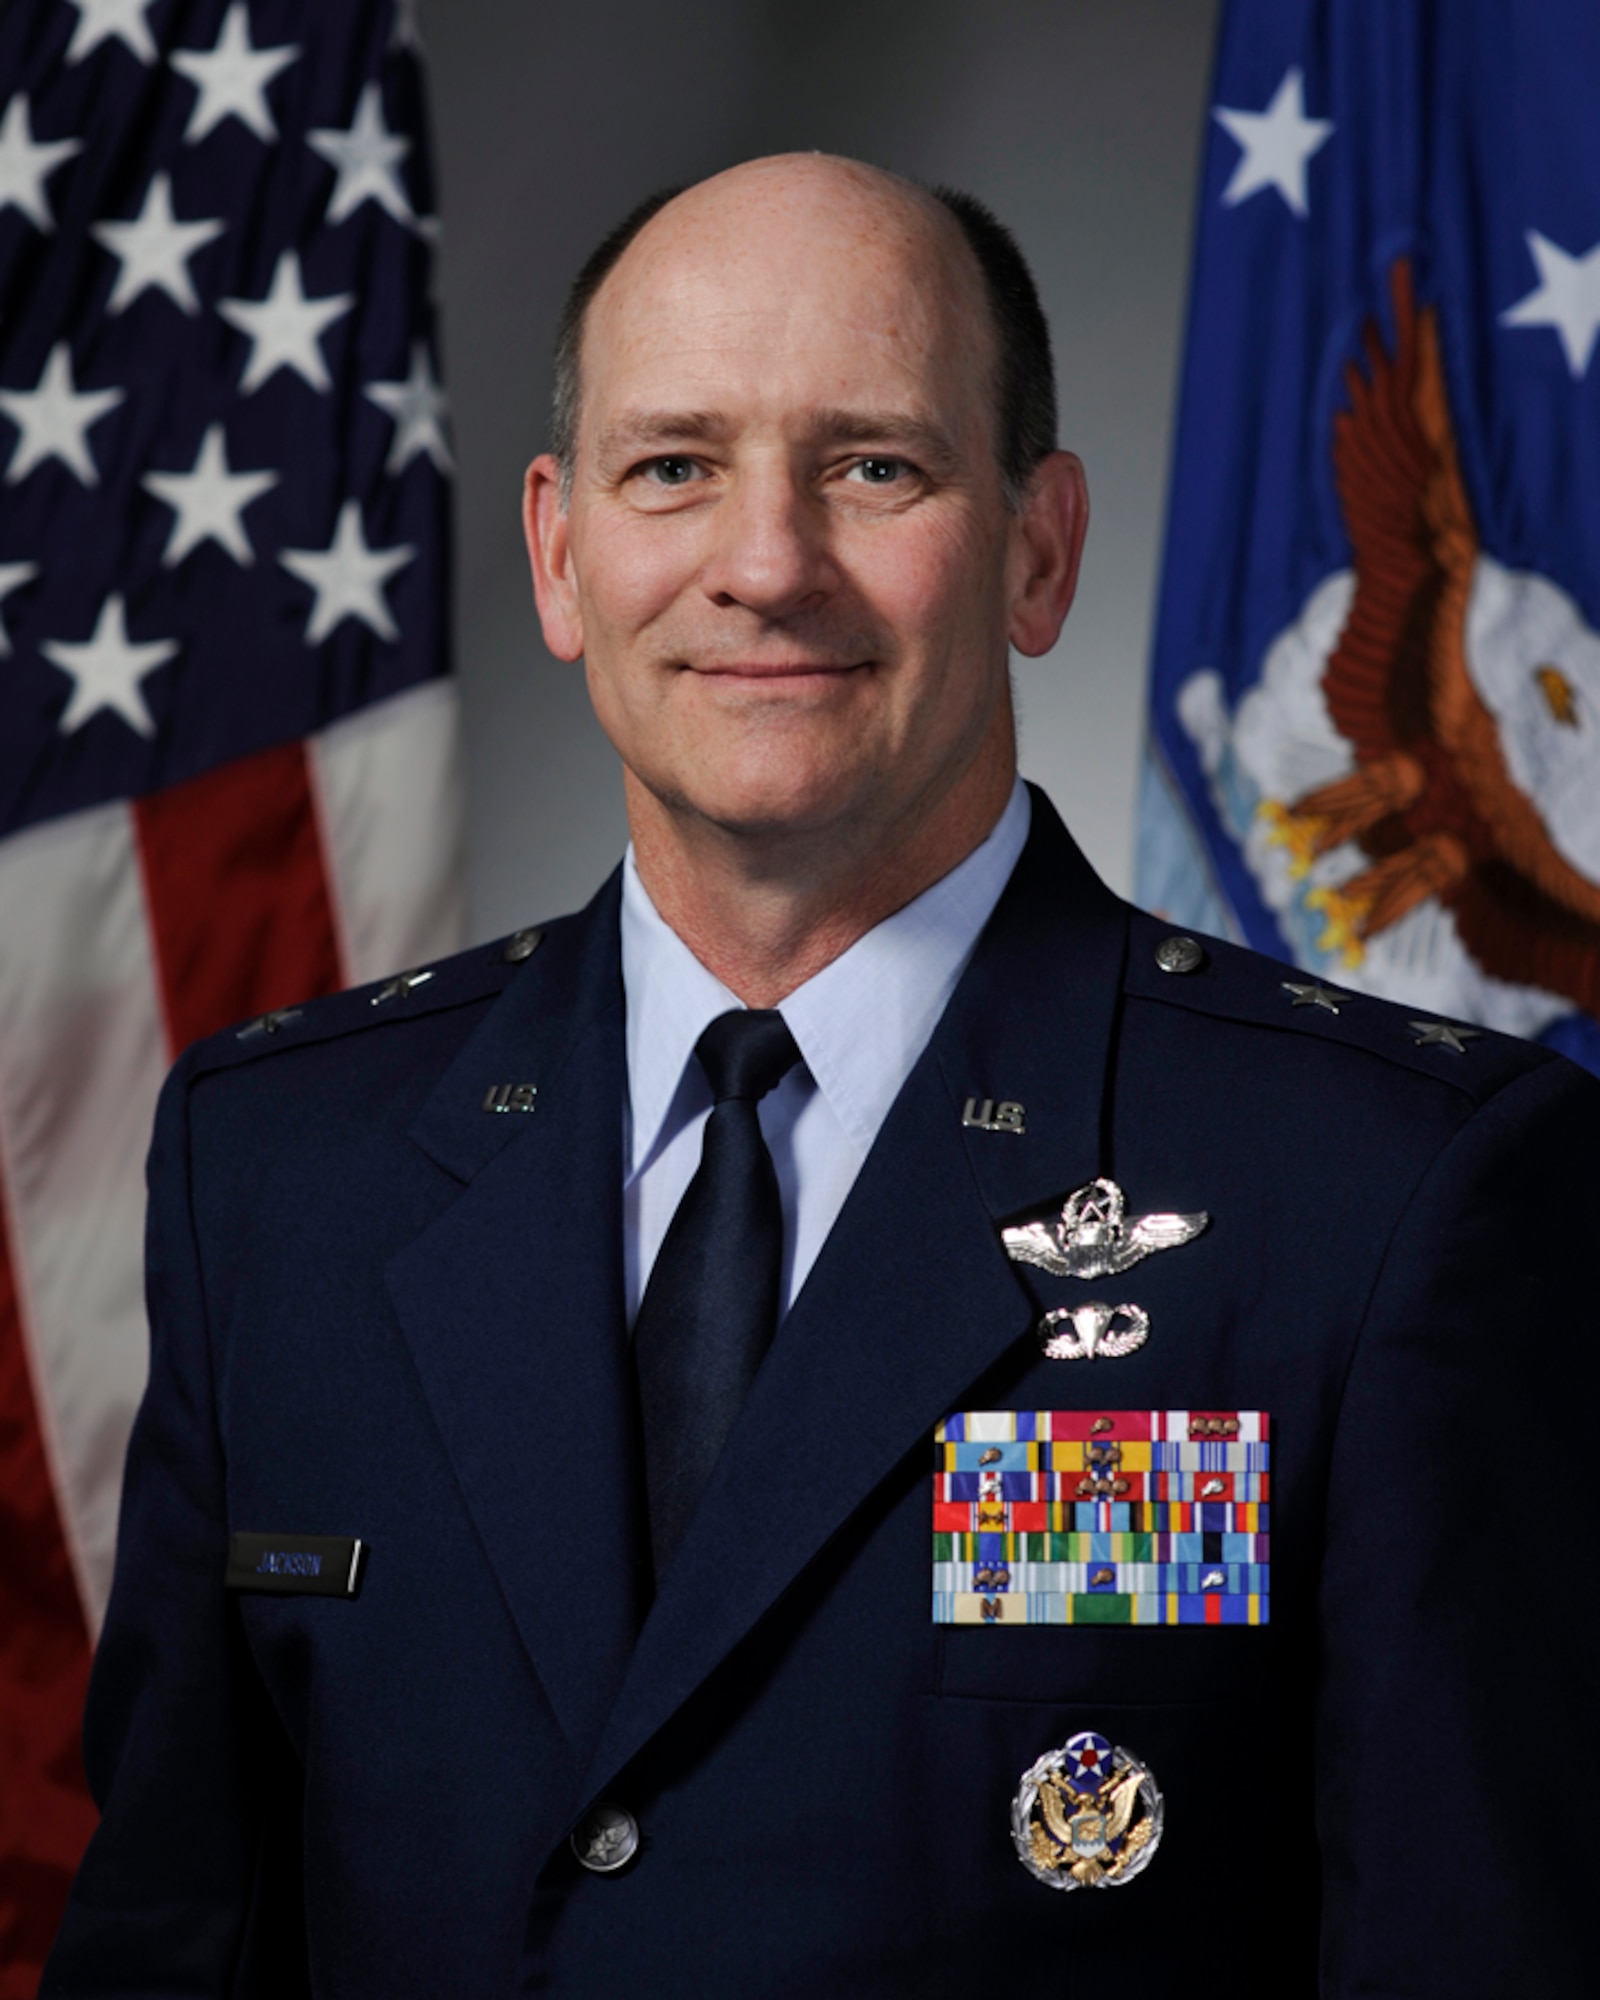 Maj. Gen. James F. Jackson has been nominated for appointment to the rank of lieutenant general and for assignment as chief of Air Force Reserve and commander of Air Force Reserve Command, Headquarters U.S. Air Force, Pentagon, Washington, D.C., March 20, 2012.